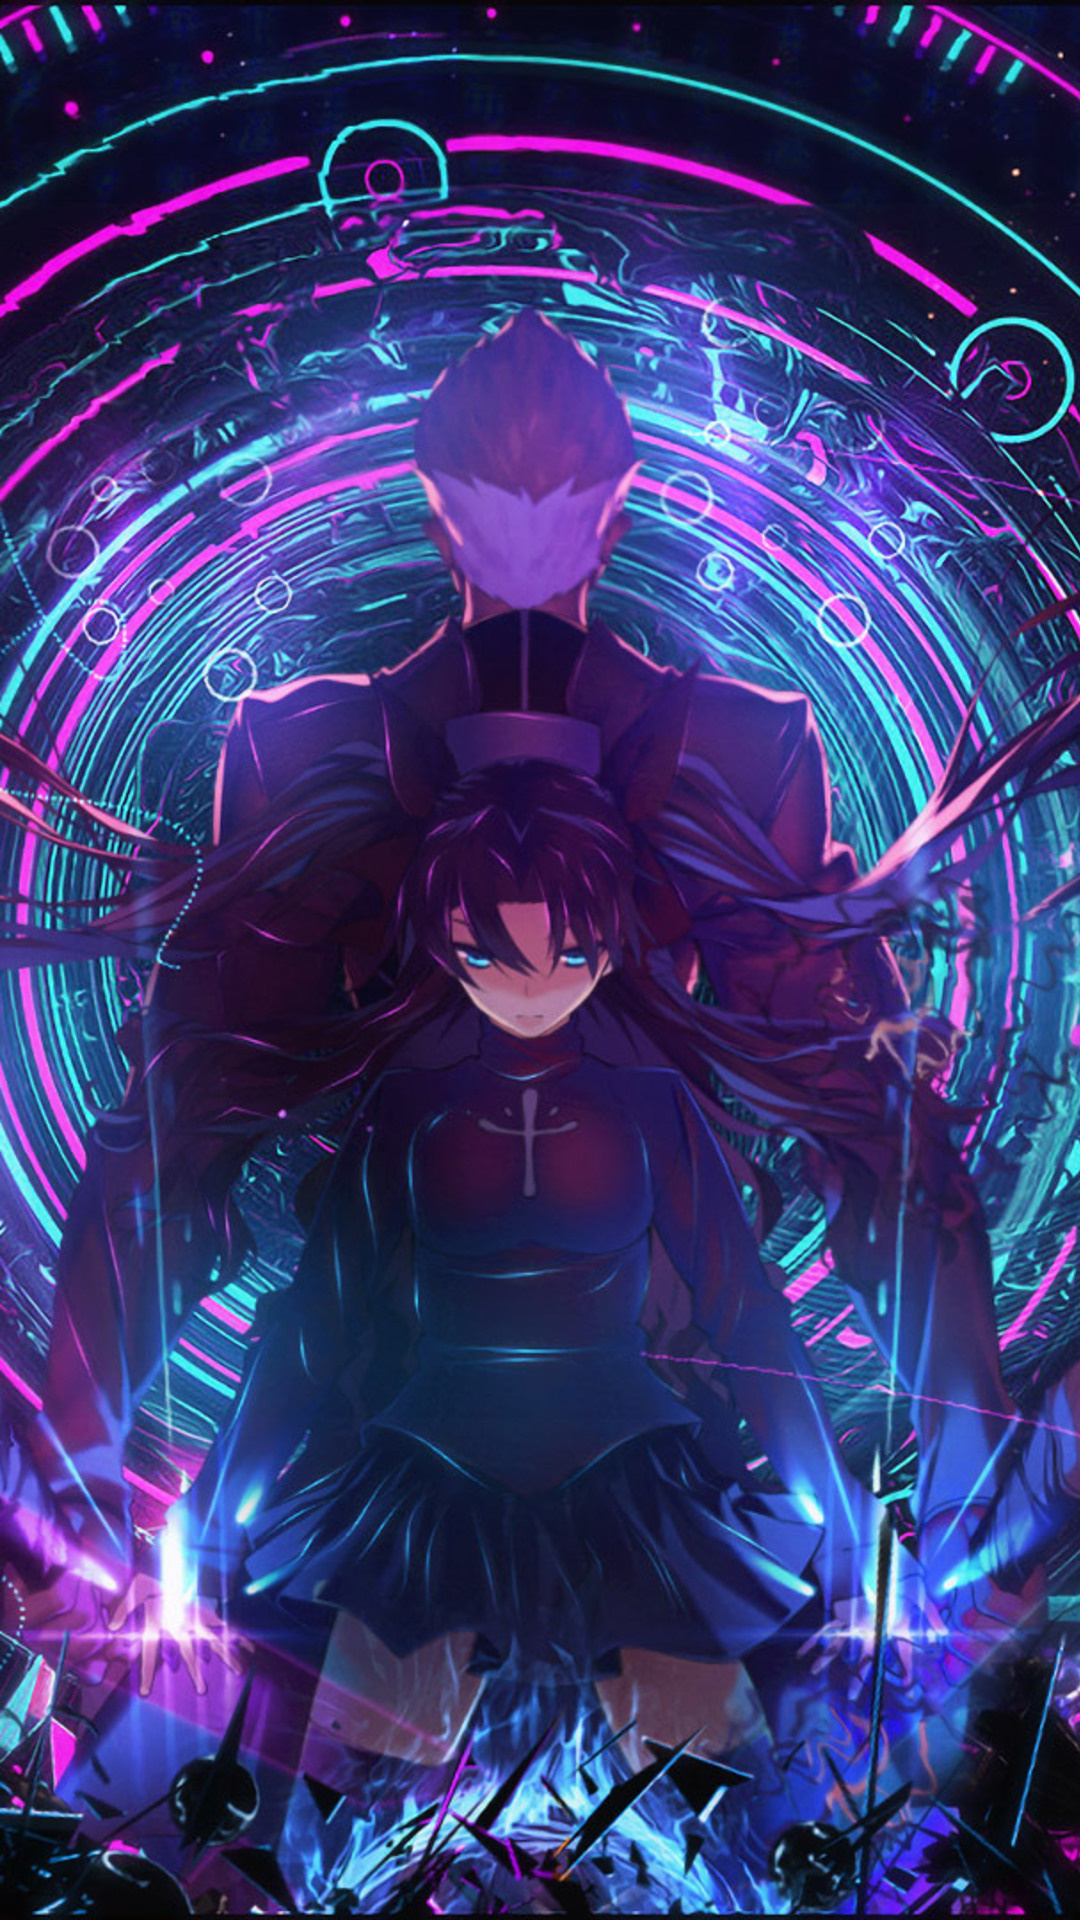 Fate/stay night, Tohsaka images, Anime background, Mage family, 1080x1920 Full HD Handy